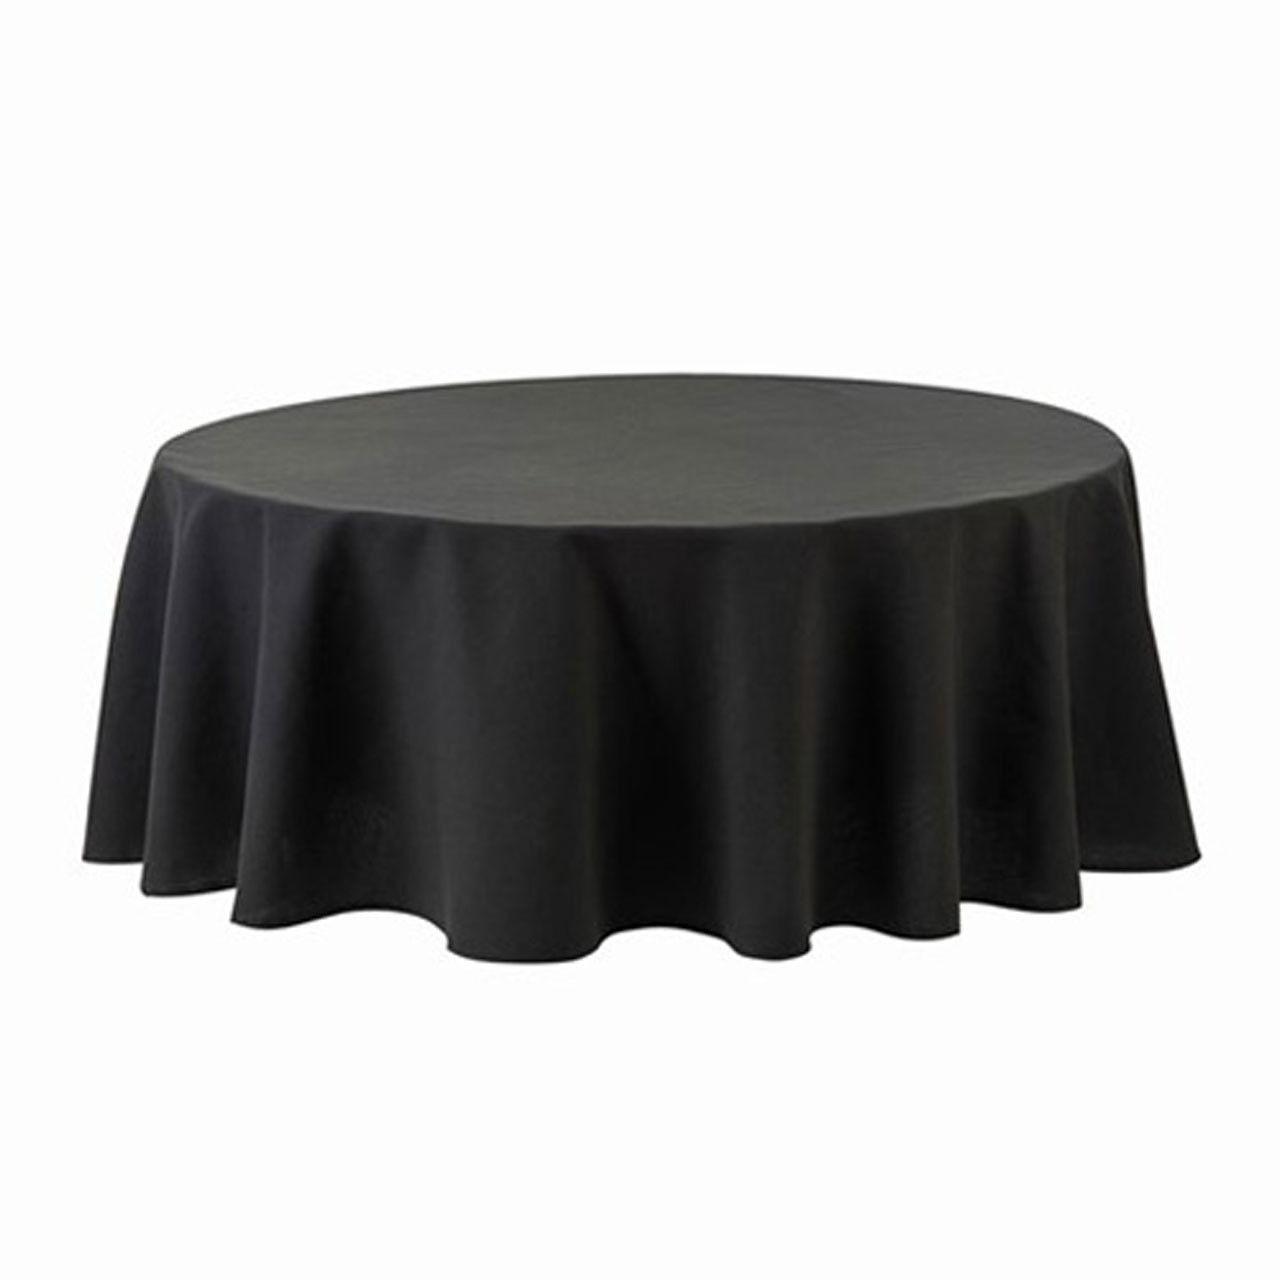 Is the black round tablecloth easy to maintain?